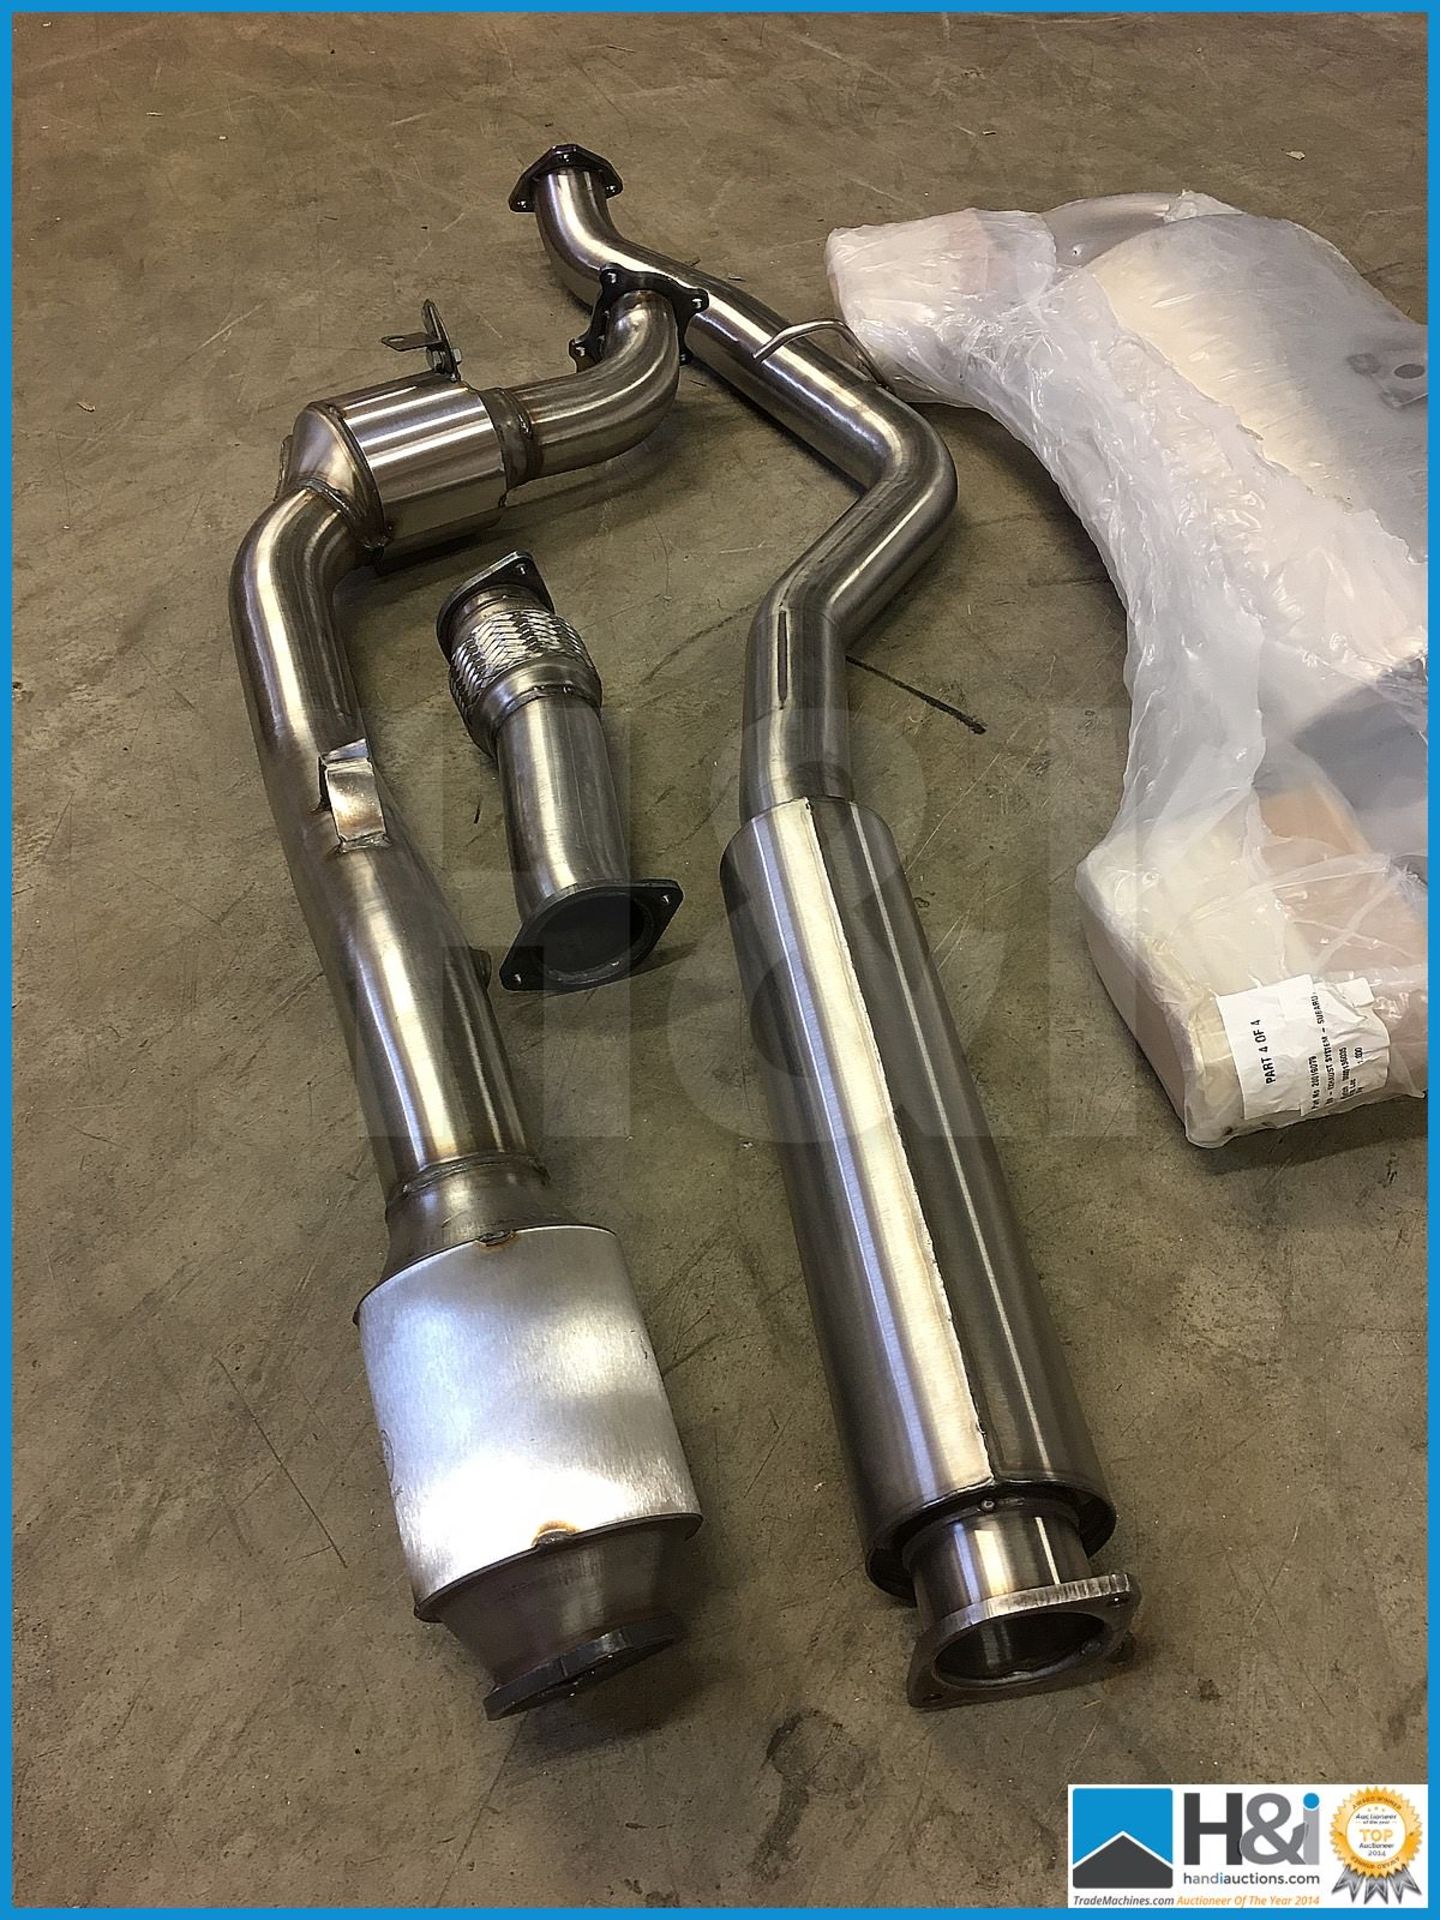 Subaru Cosworth CS400 compete exhaust system. This is only one of 8 systems available in the world. - Image 2 of 6